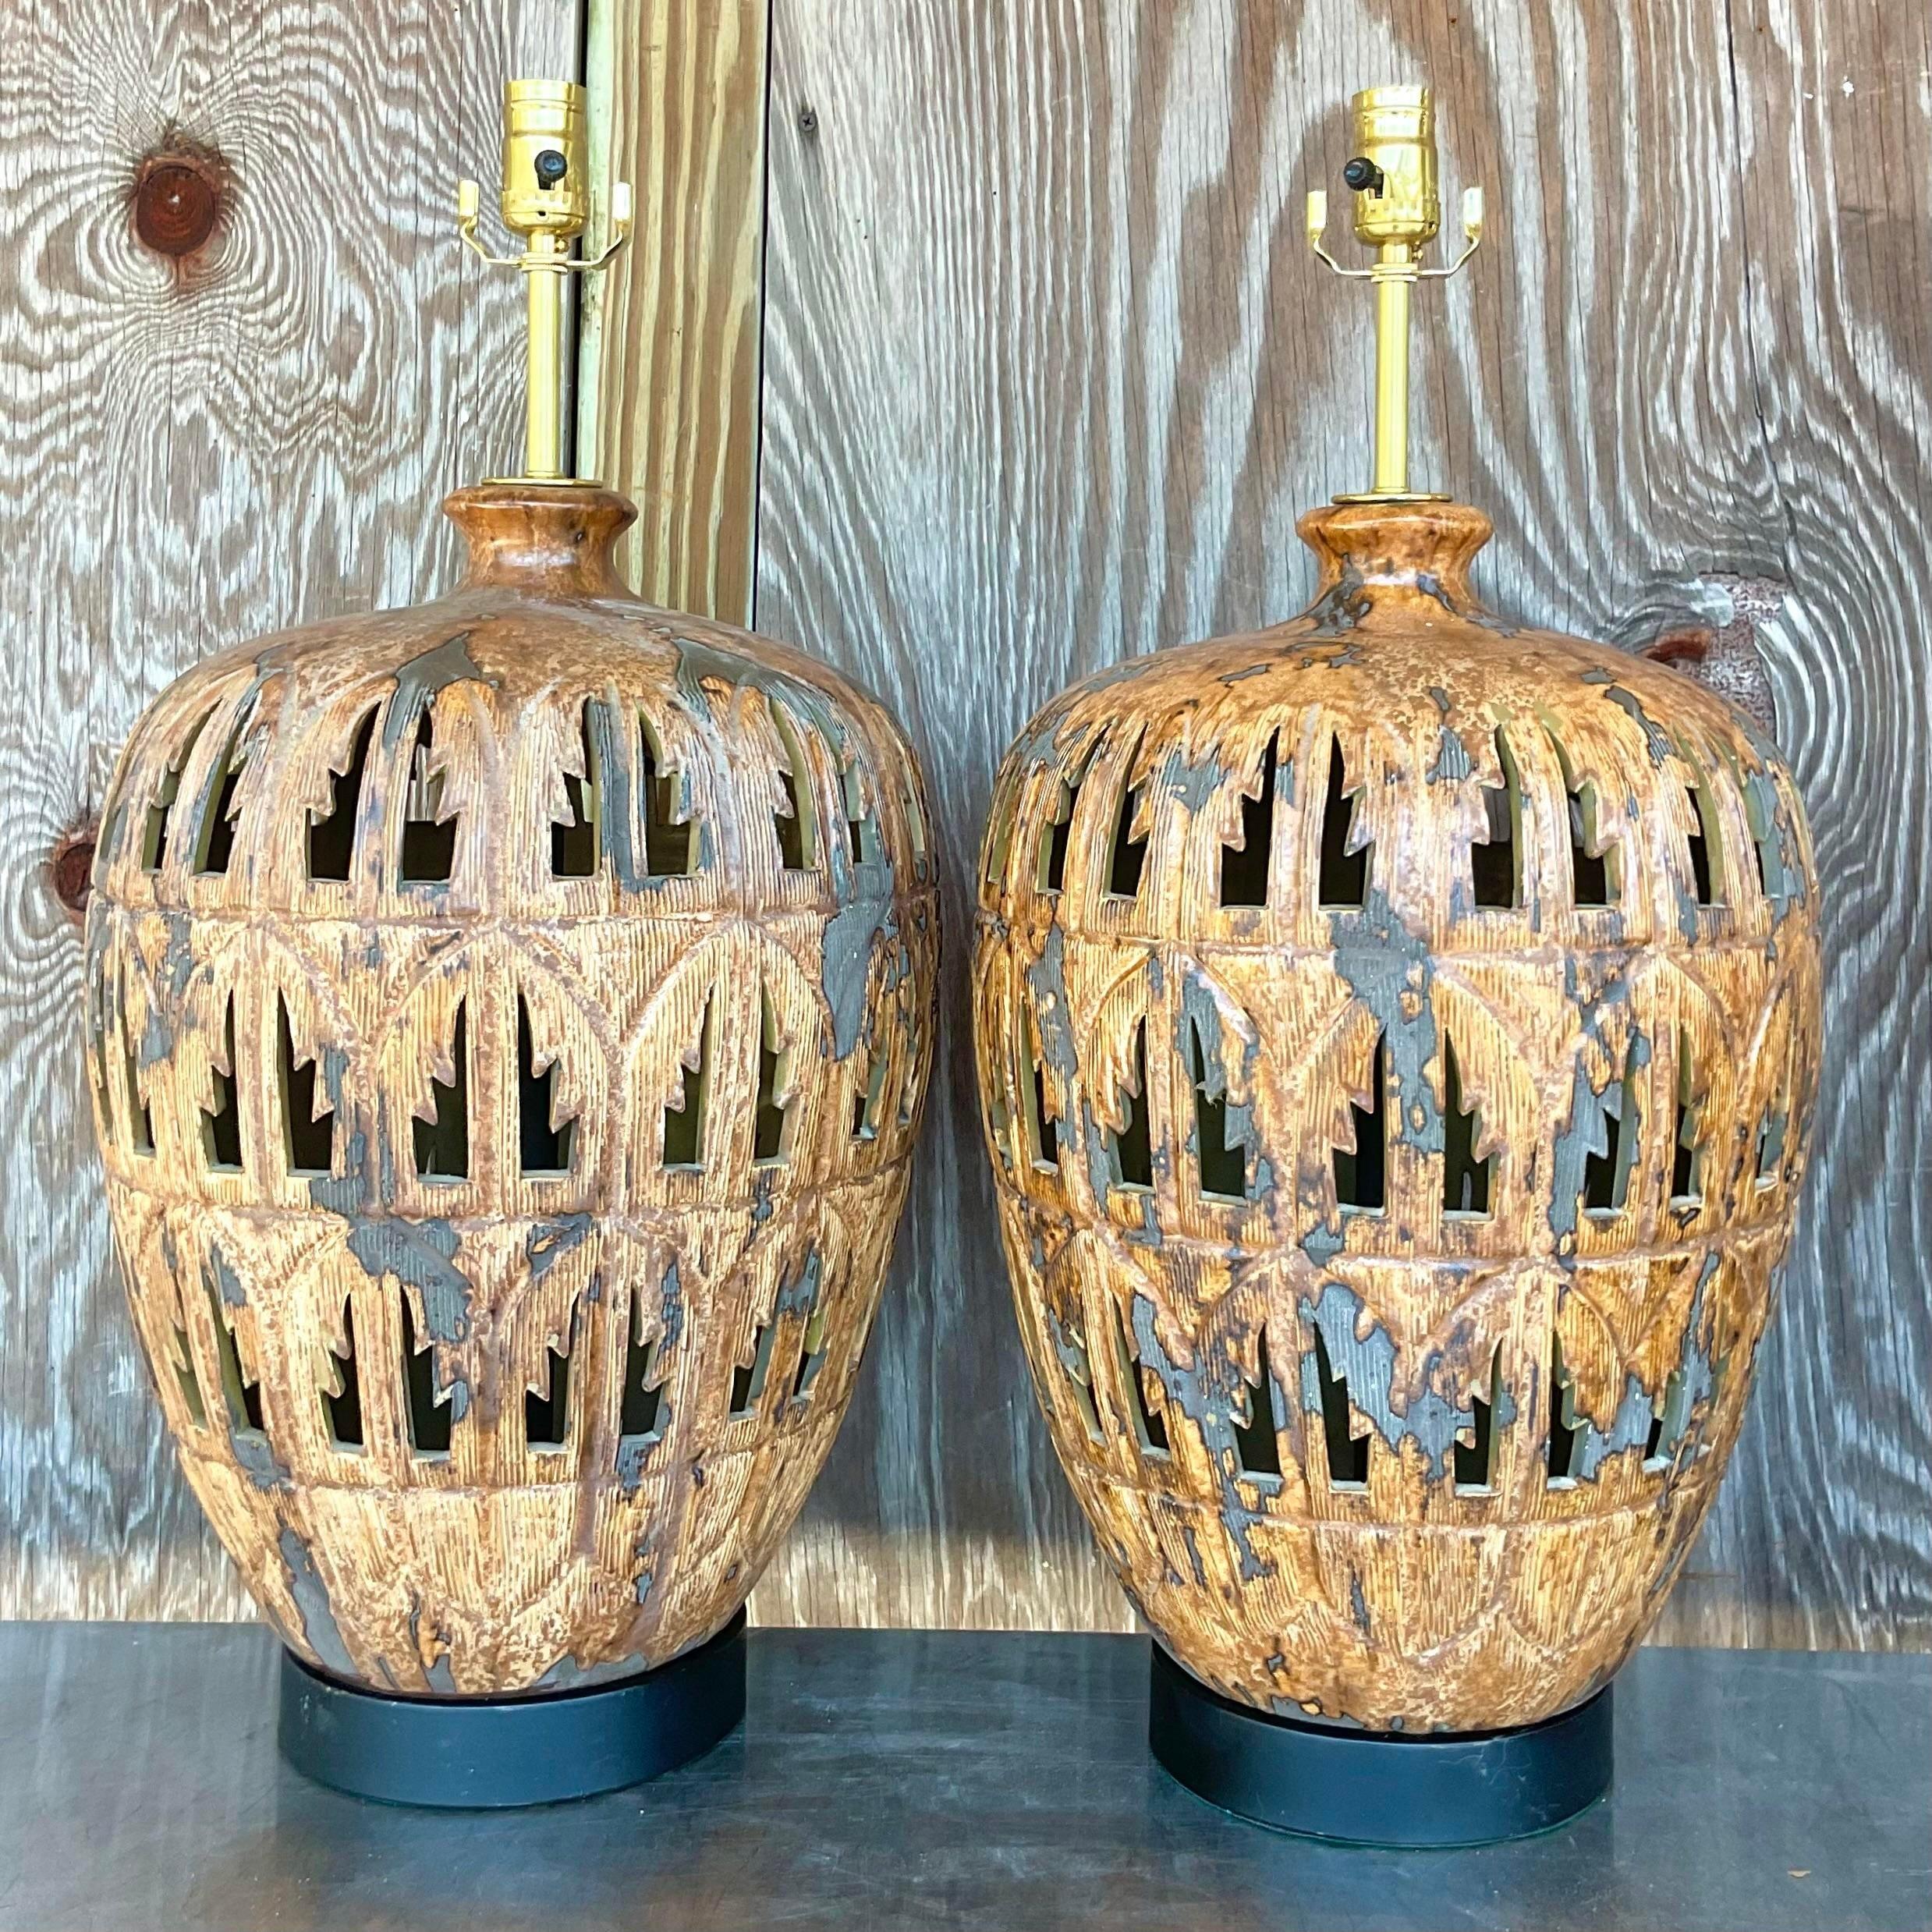 20th Century Vintage Boho Punch Cut Palm Frond Ceramic Table Lamps - a Pair For Sale